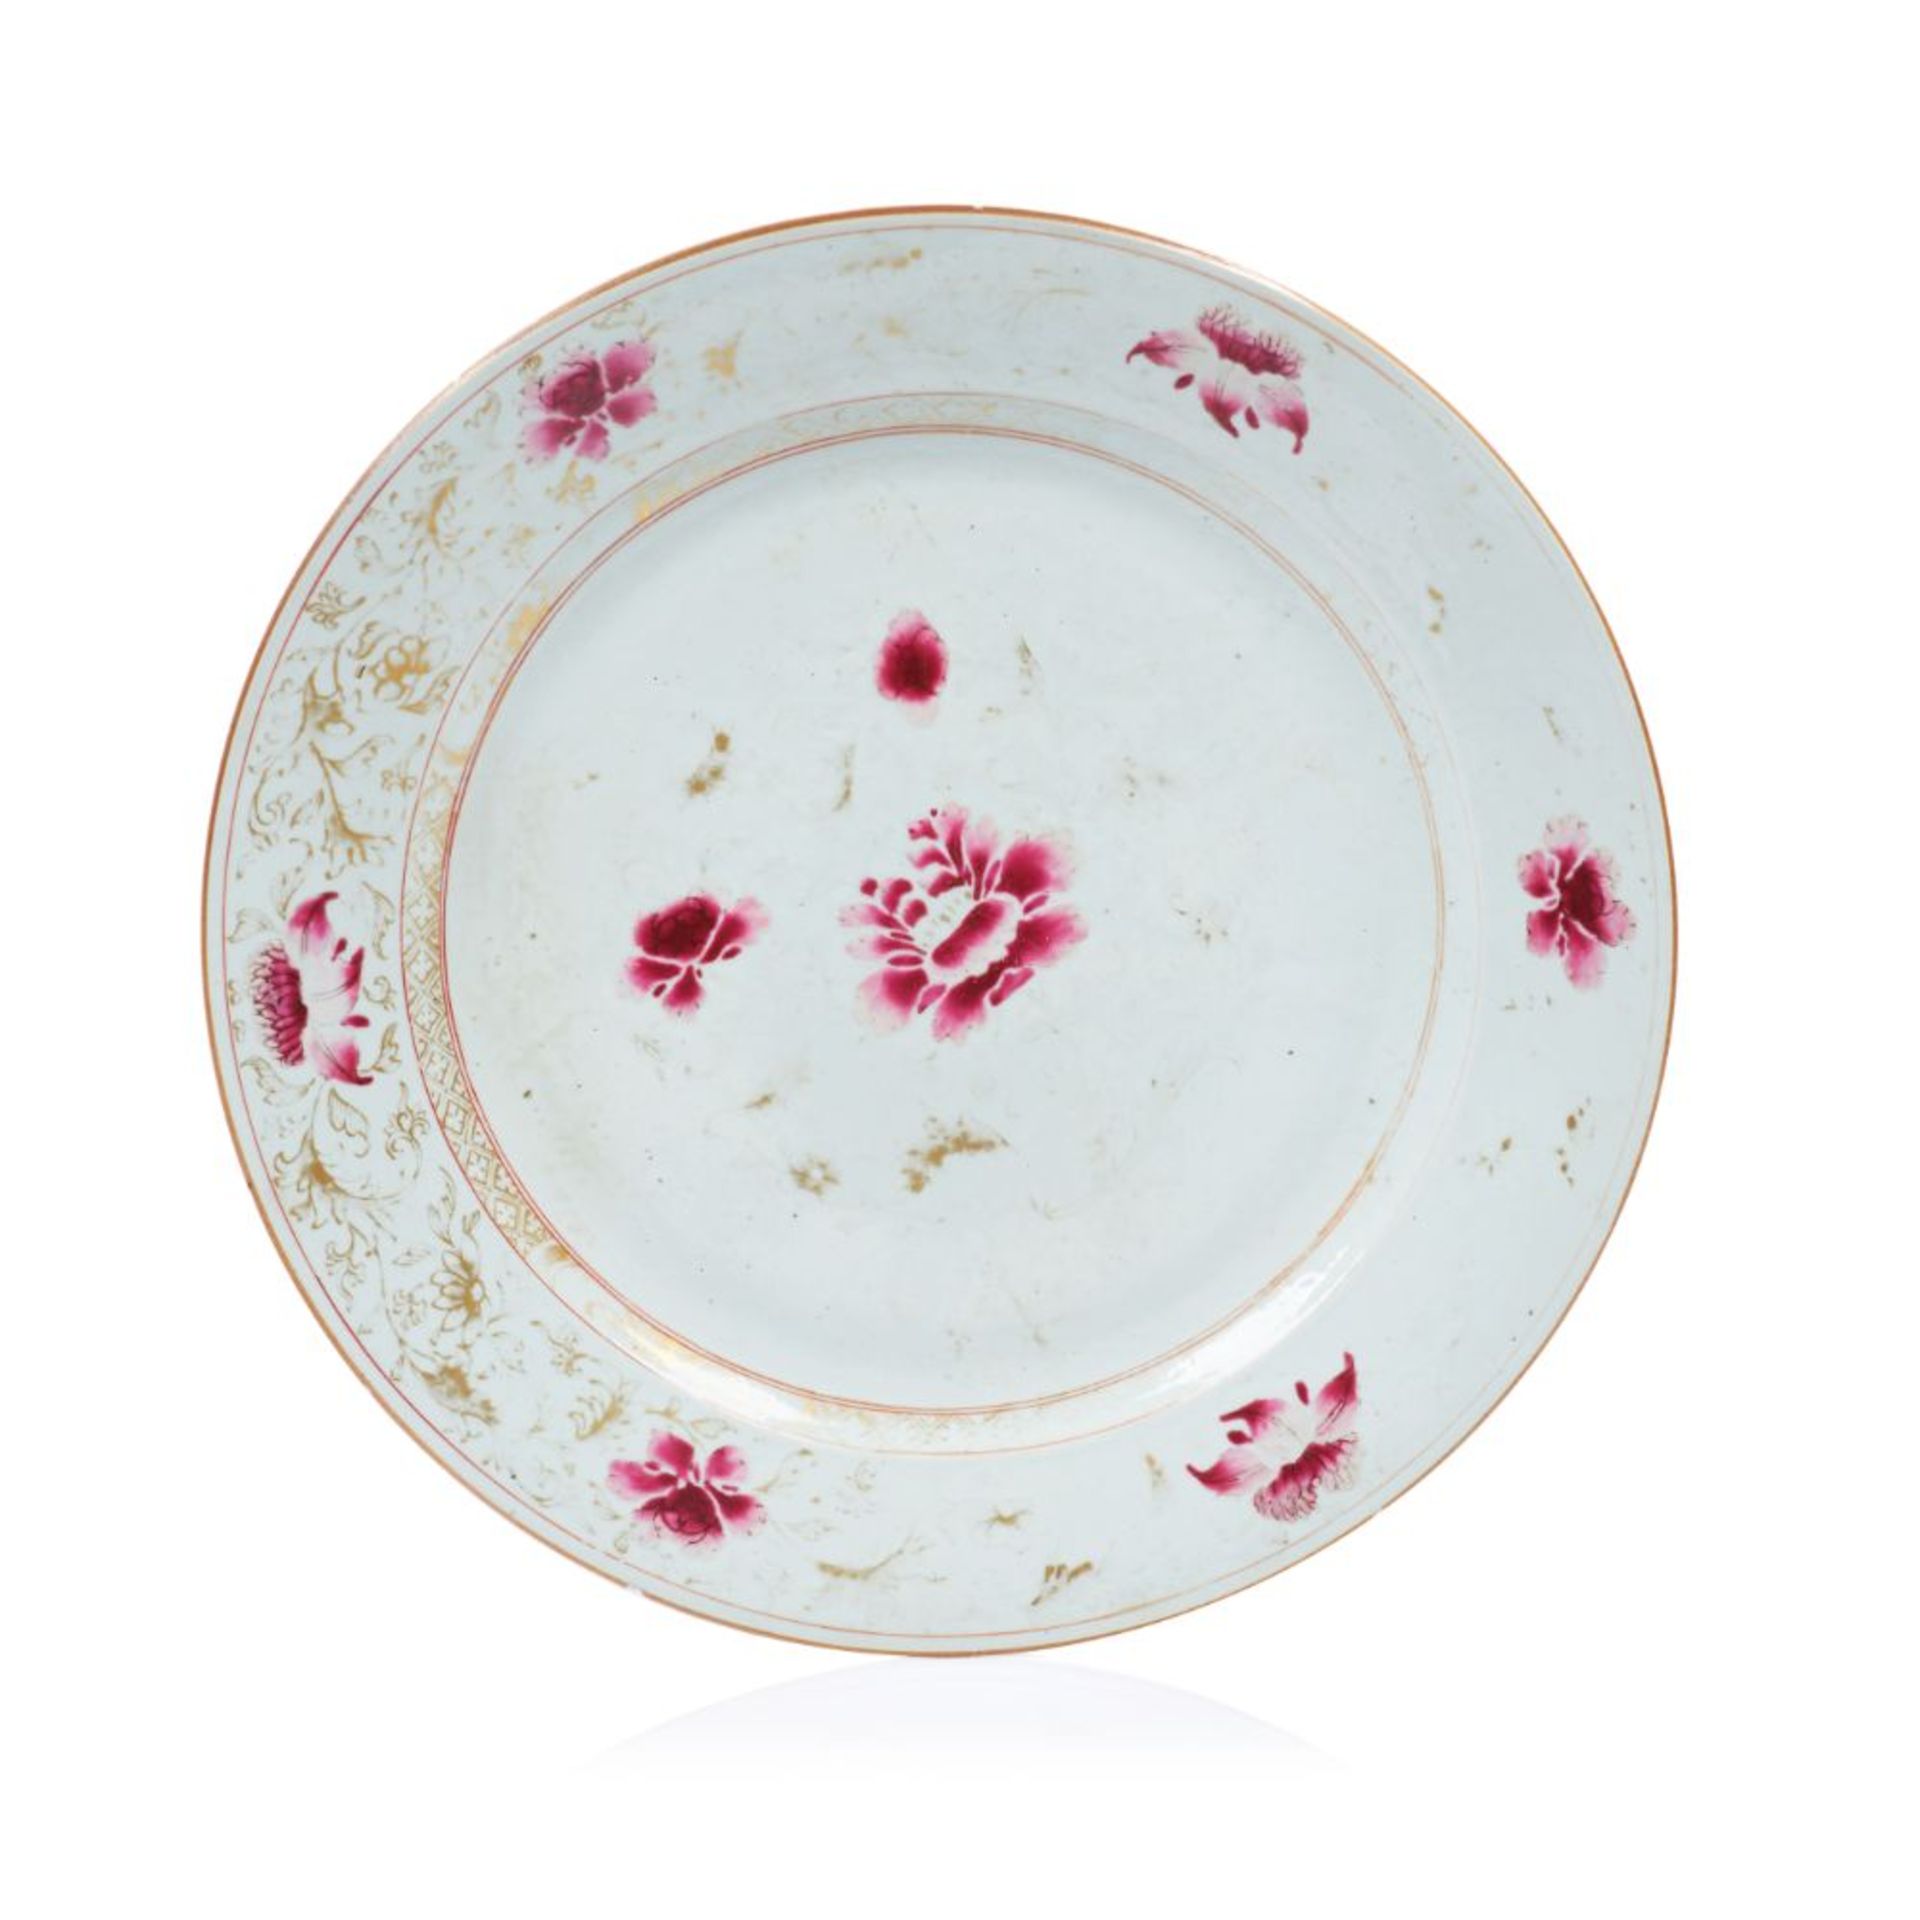 A large plate, Polychrome "Famille Rose" enamelled, Bianco-sopra-Bianco and gilt floral motifs